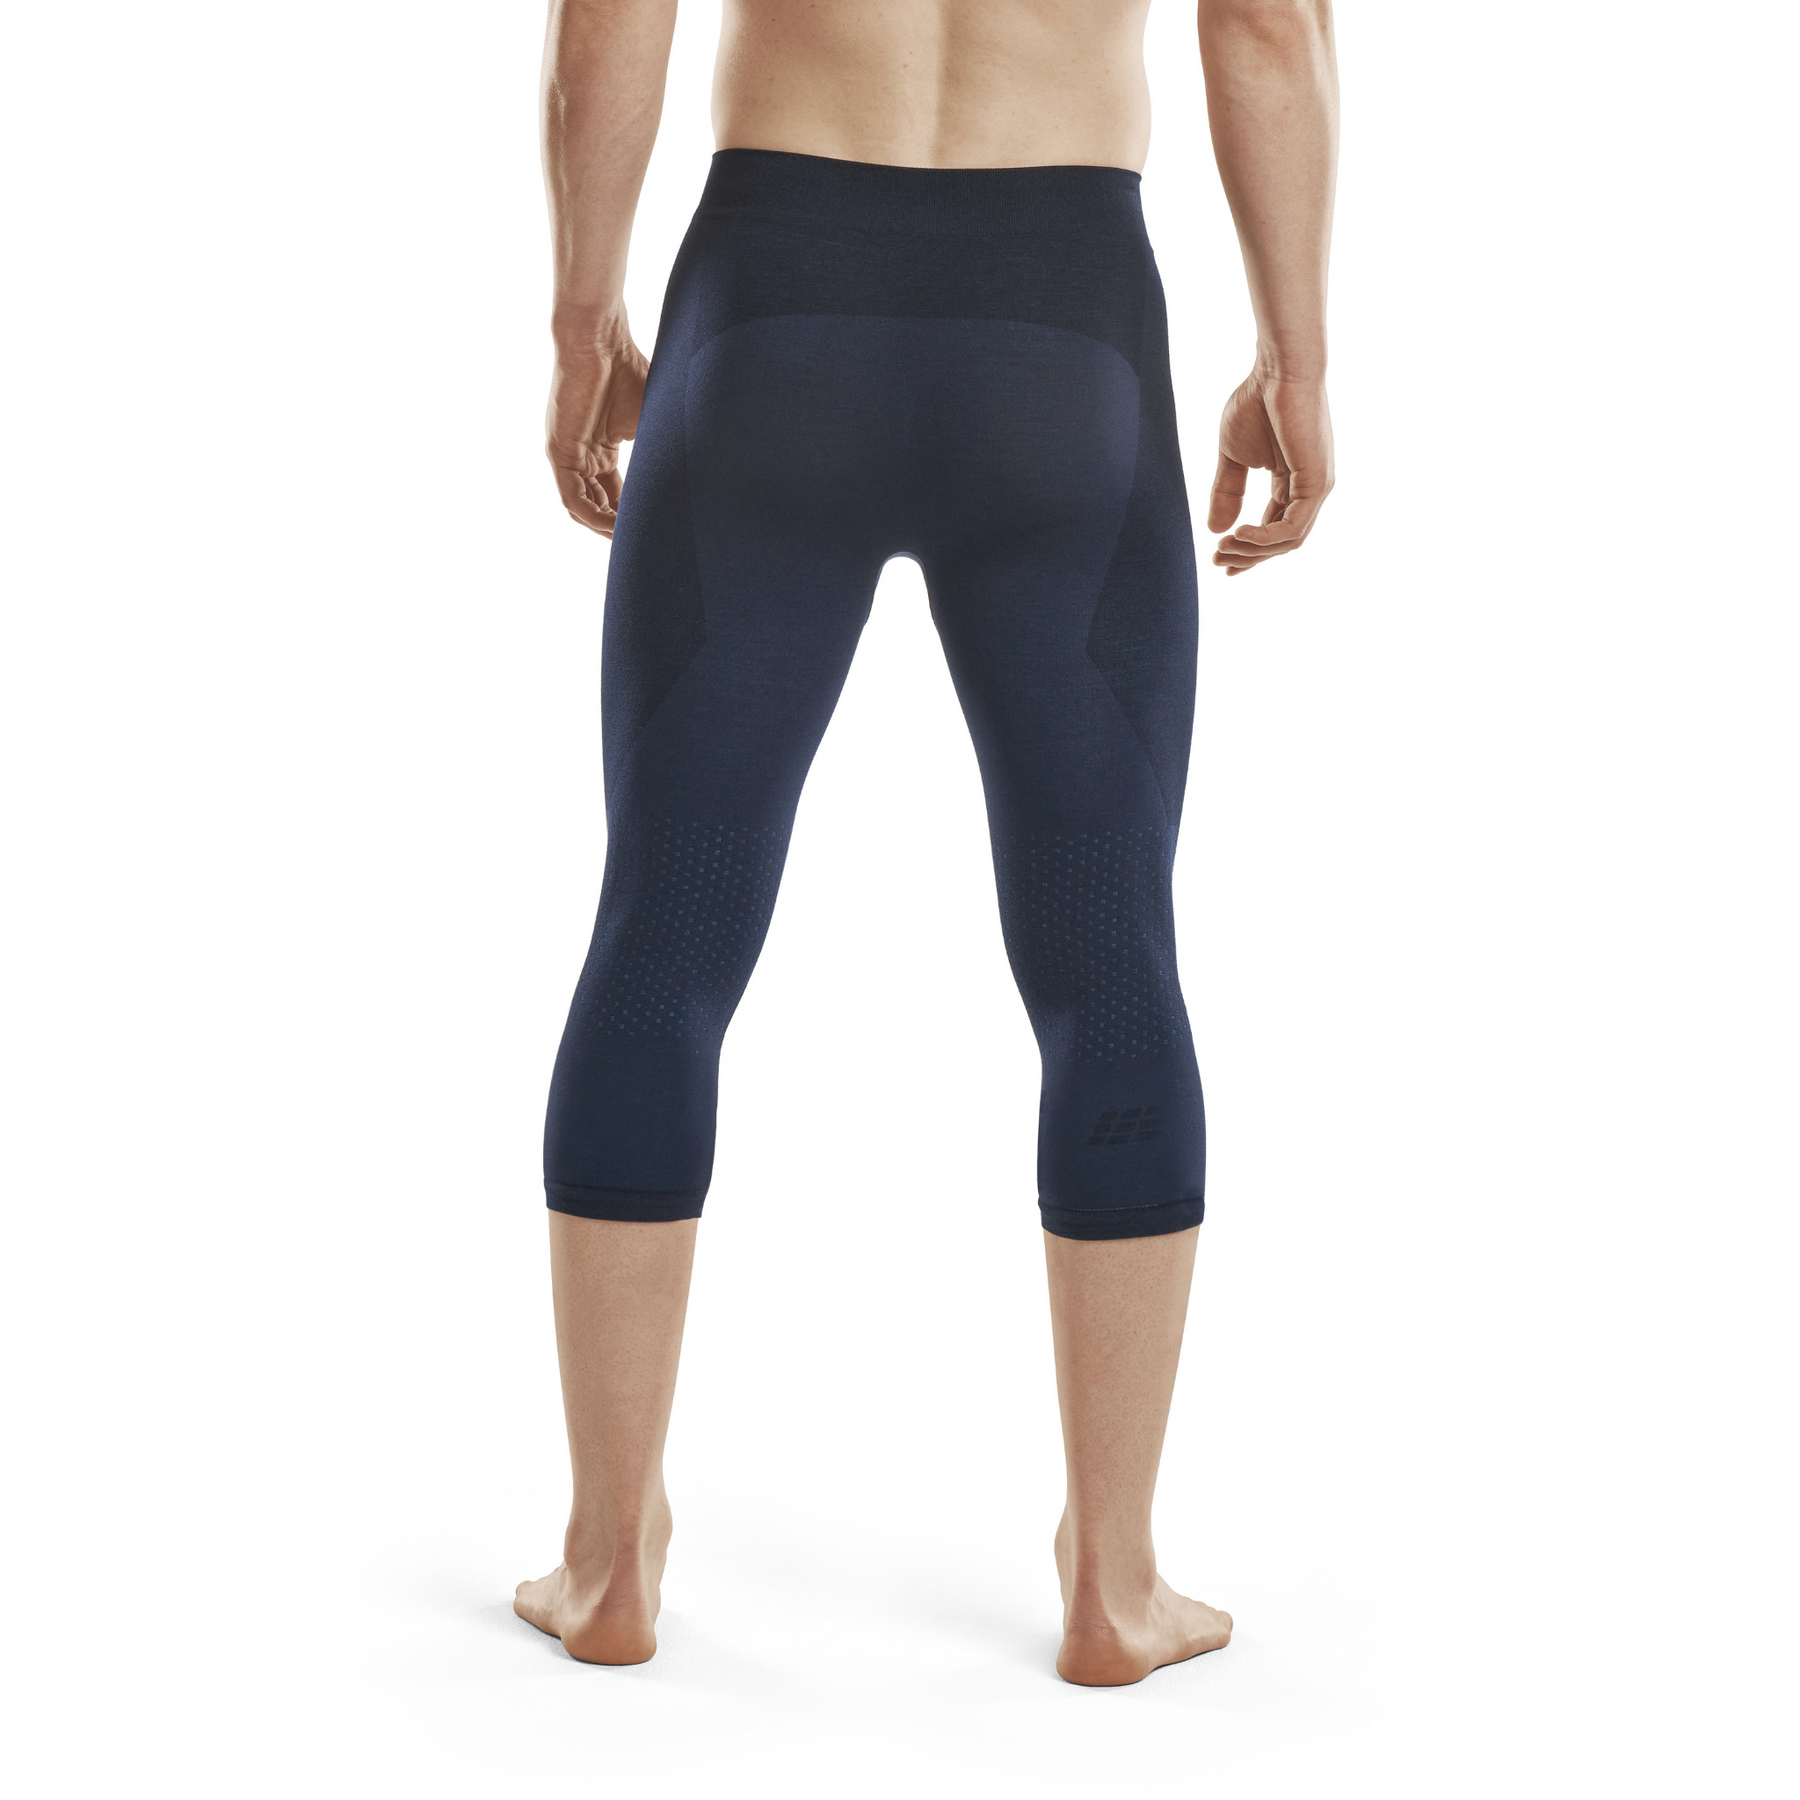 CEP SKI COMPRESSION 3/4 BASE TIGHTS - MADE IN GERMANY - Base layer